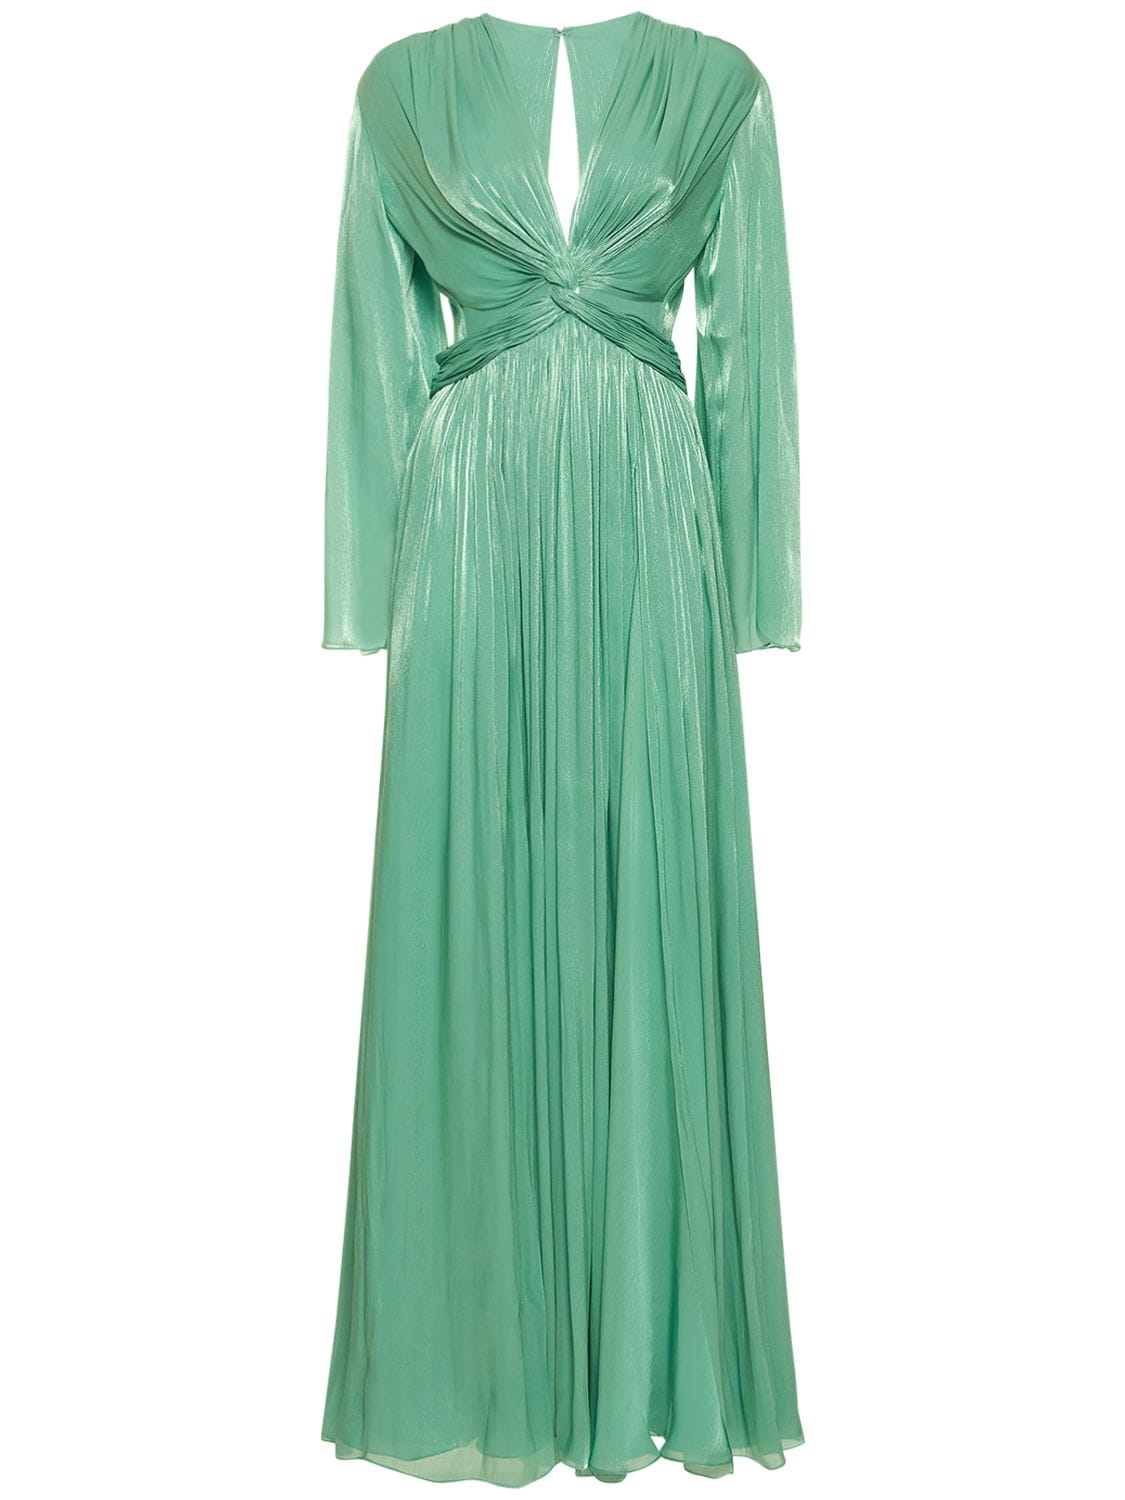 COSTARELLOS SHINY IRIDESCENT GEORGETTE KNOT GOWN